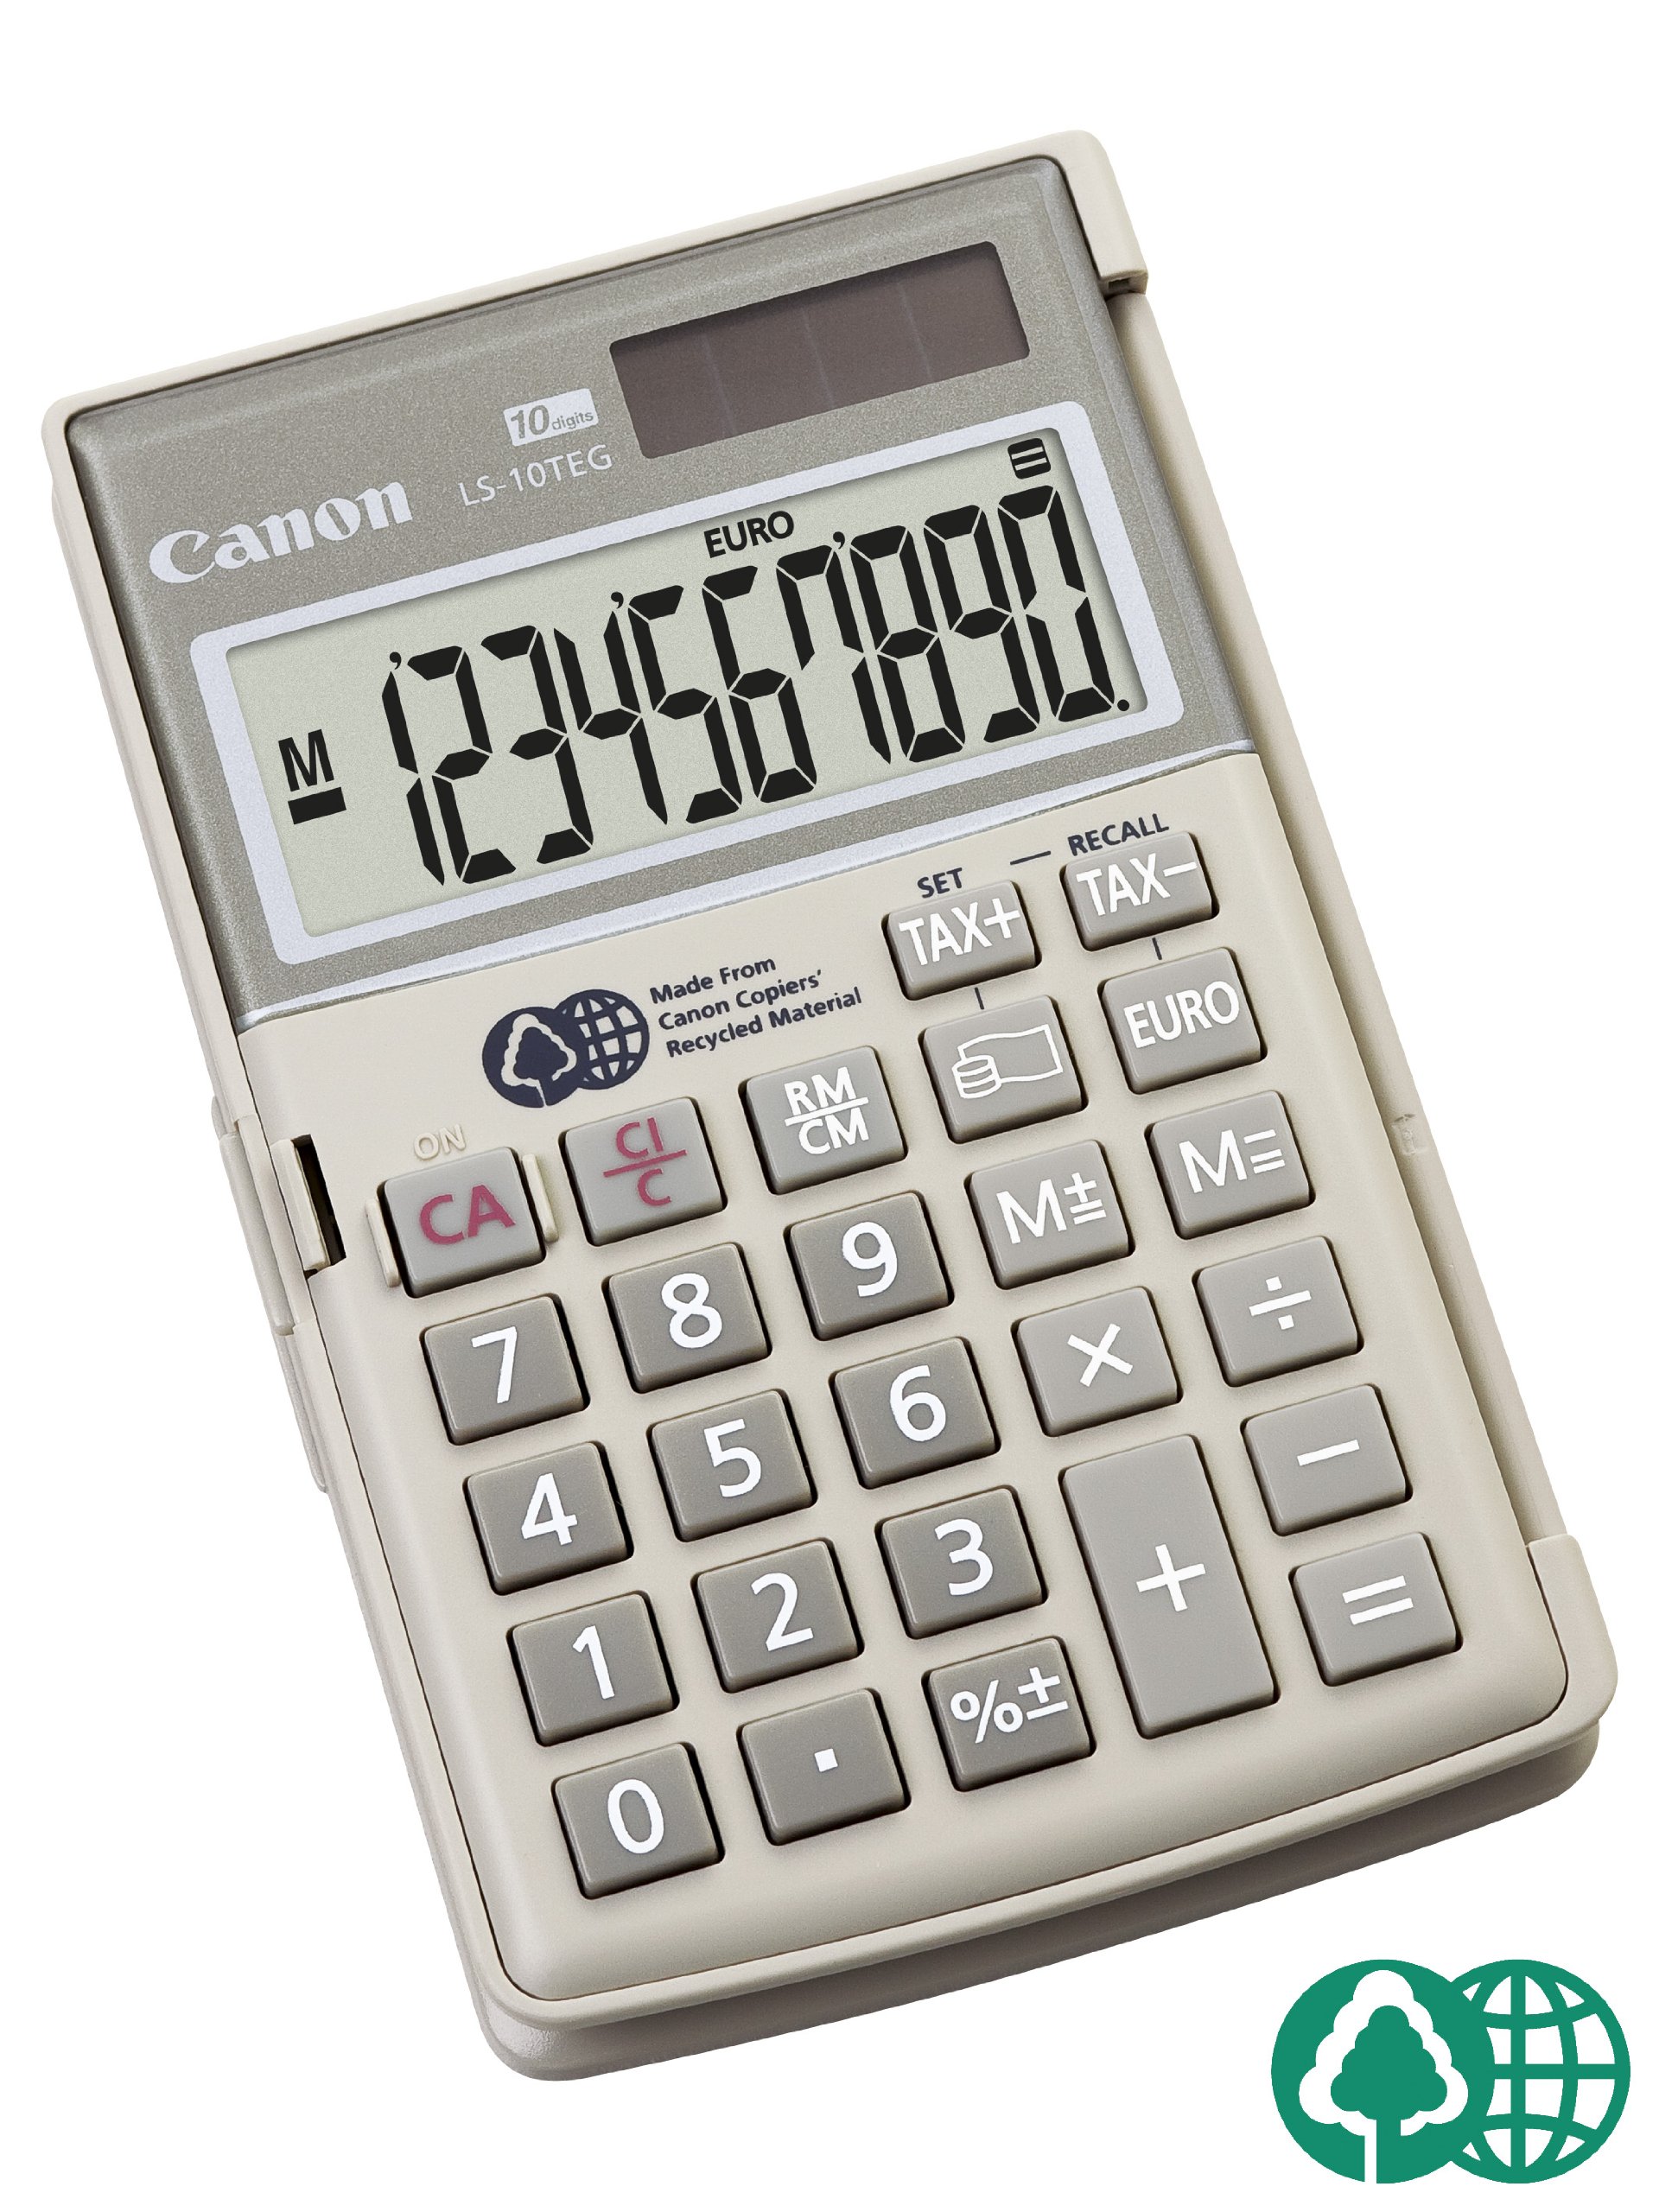 Canon LS-10TEG 10 Digit Handheld Calculator with Tax and Euro Currency Functions - White